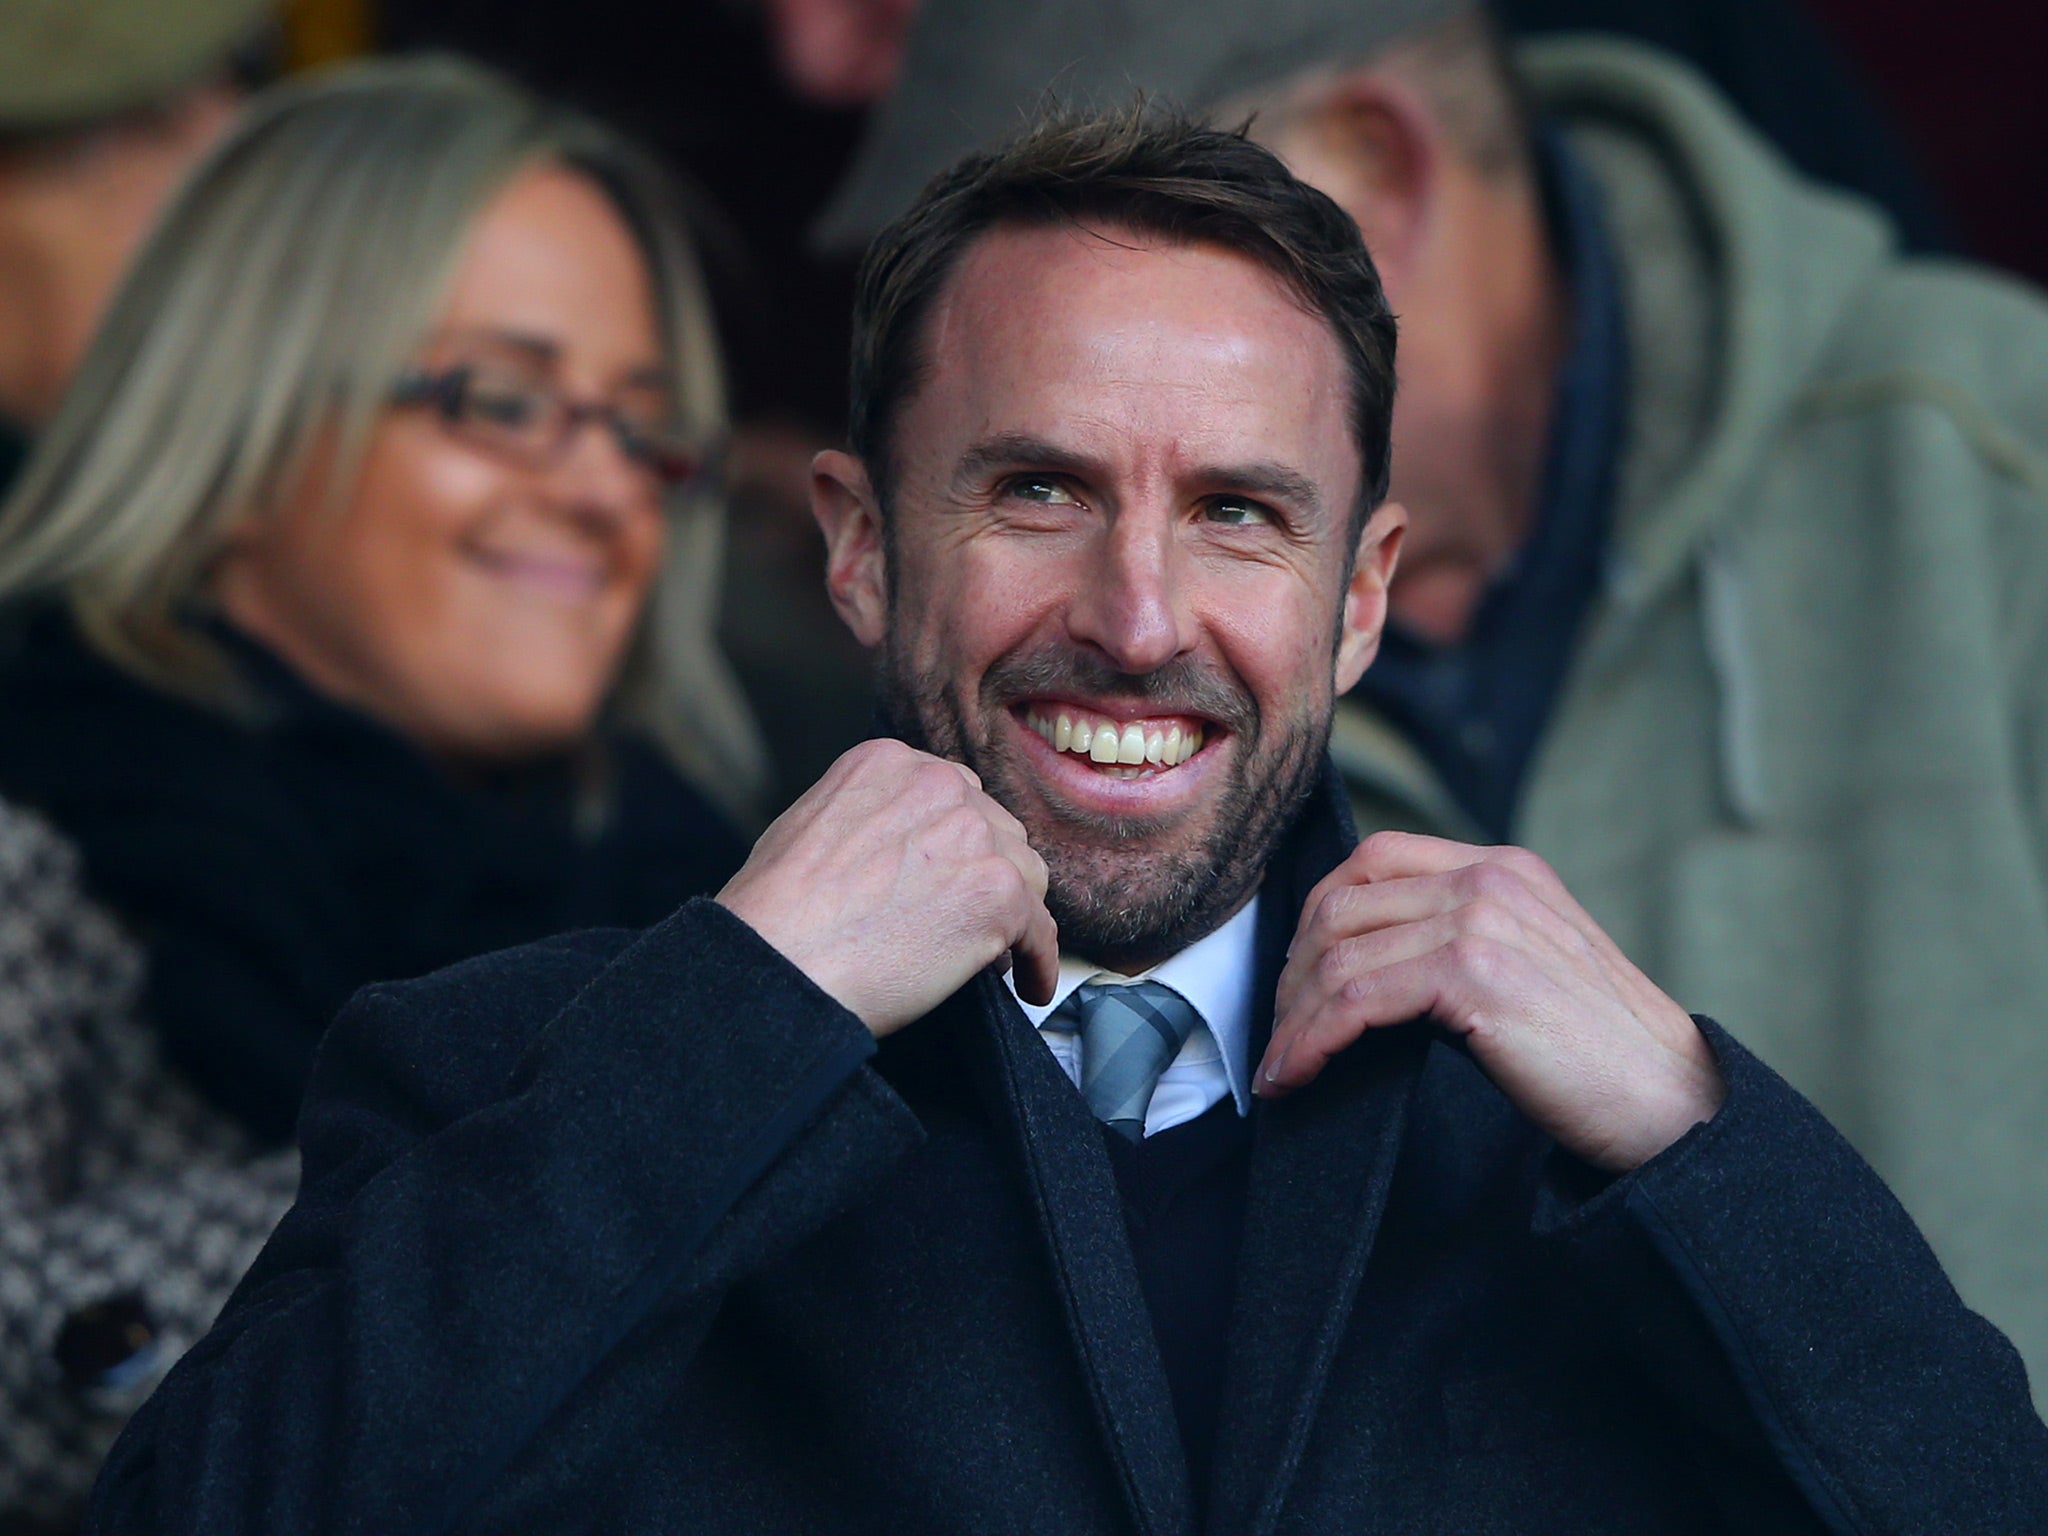 Southgate will bring intelligence, humour and a welcome self-deprecation to the role